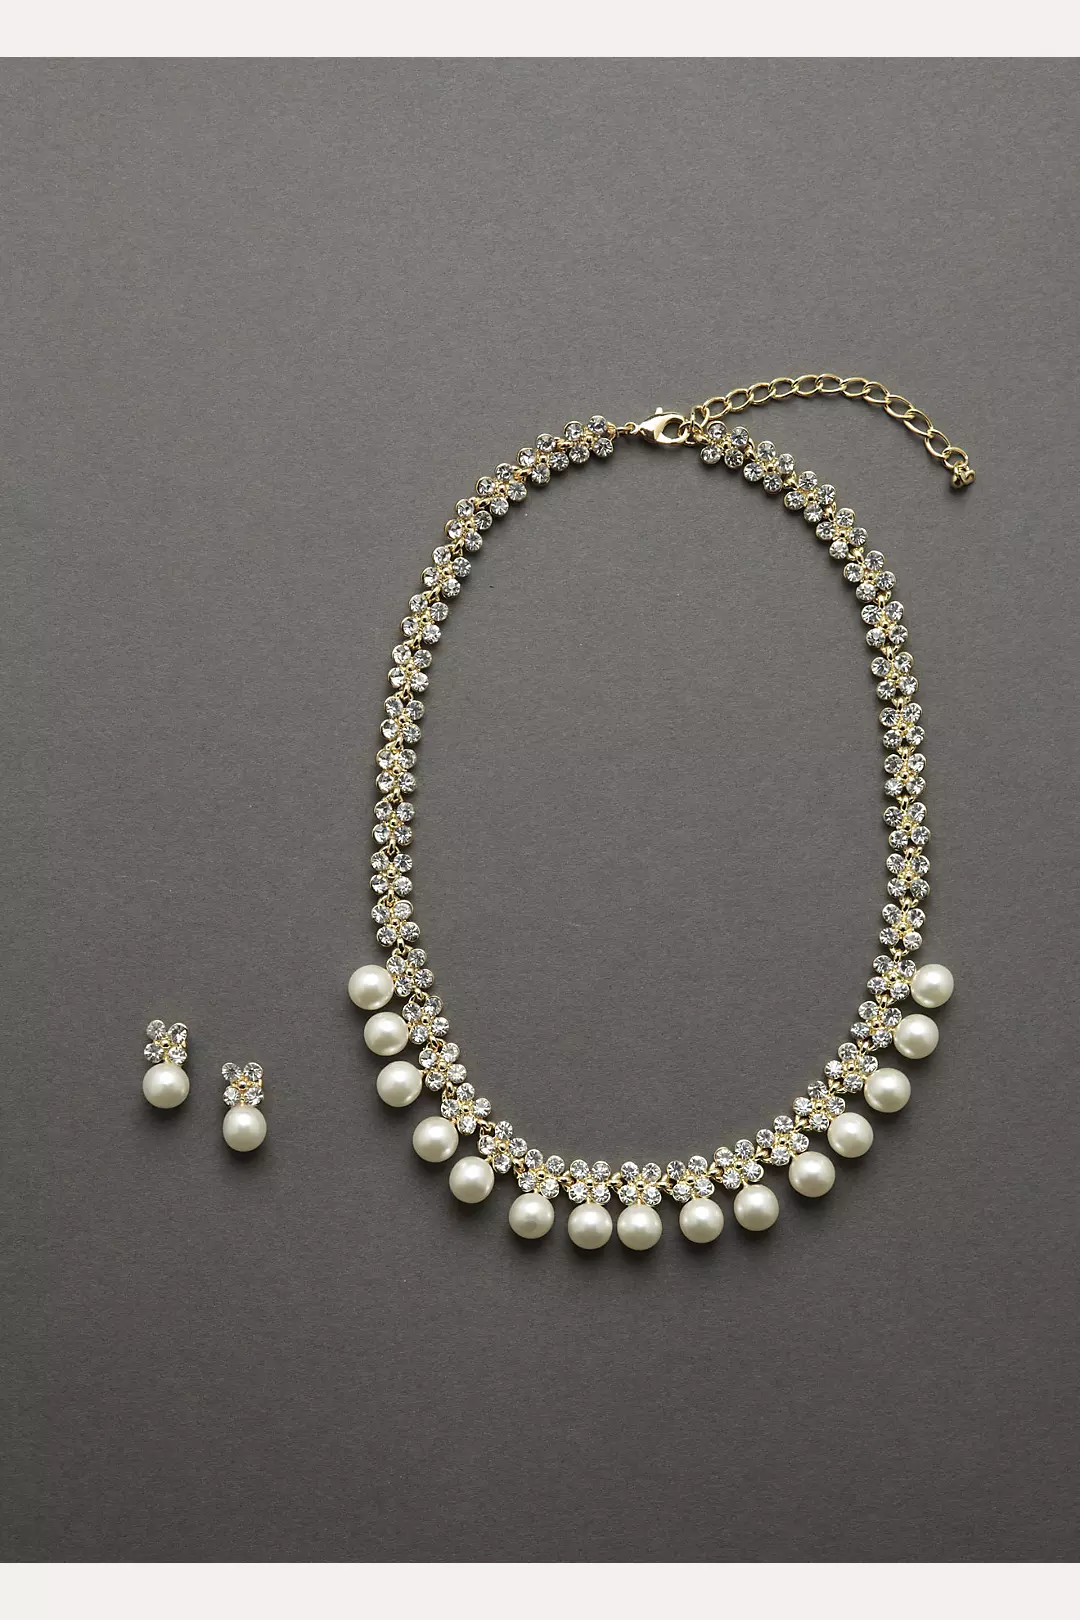 Pearl and Crystal Necklace and Earring Set Image